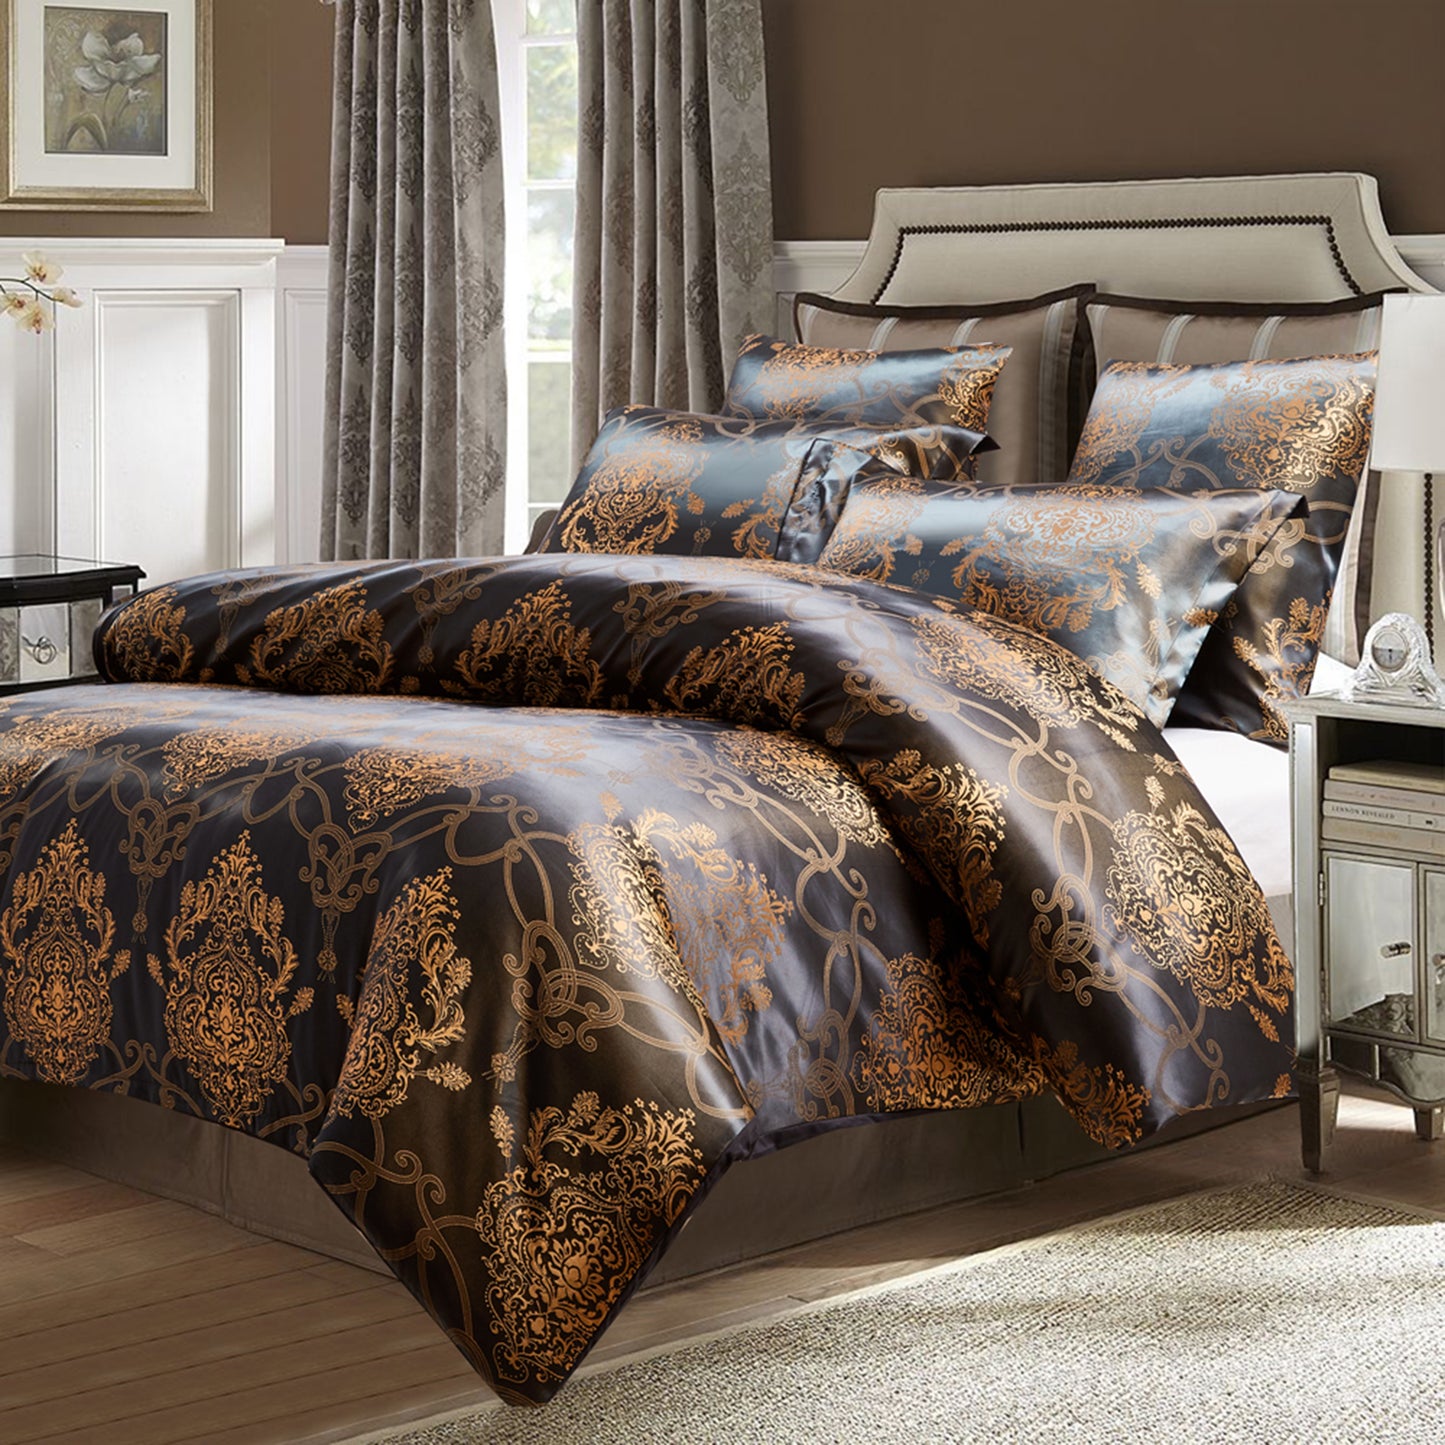 WONGS BEDDING Embroidery Satin Craft Duvet Cover Set With 2 Pillow Case